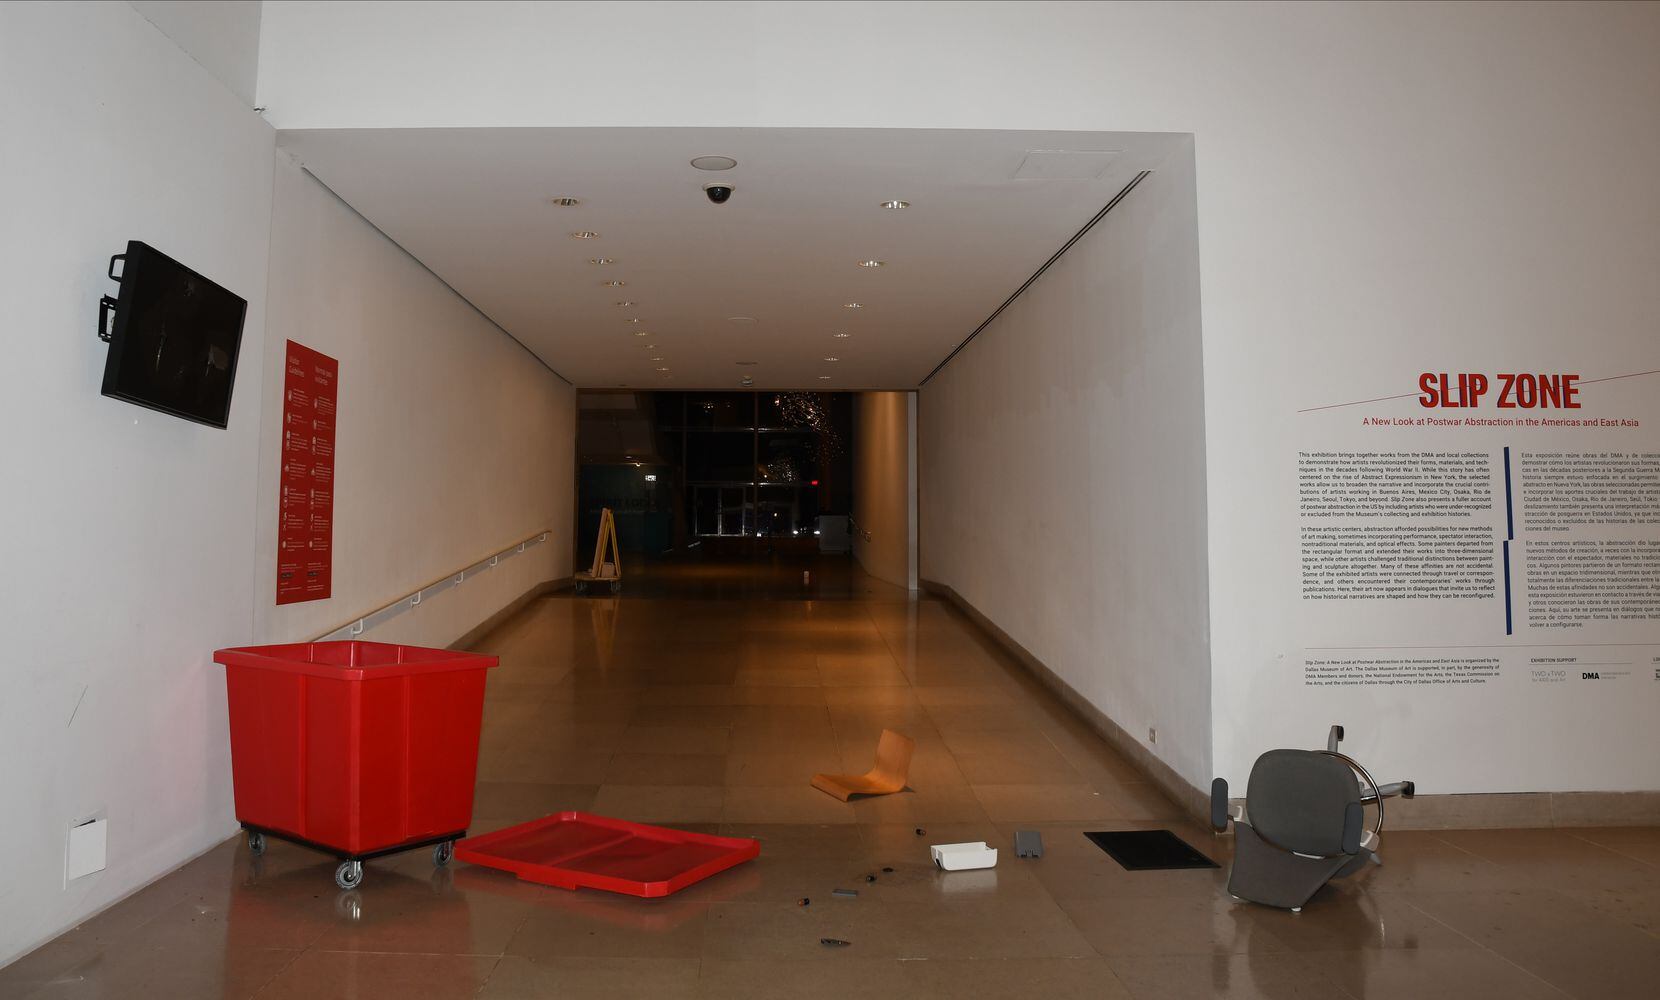 Hernandez damaged other property at the museum such as display cases, signage and computer...